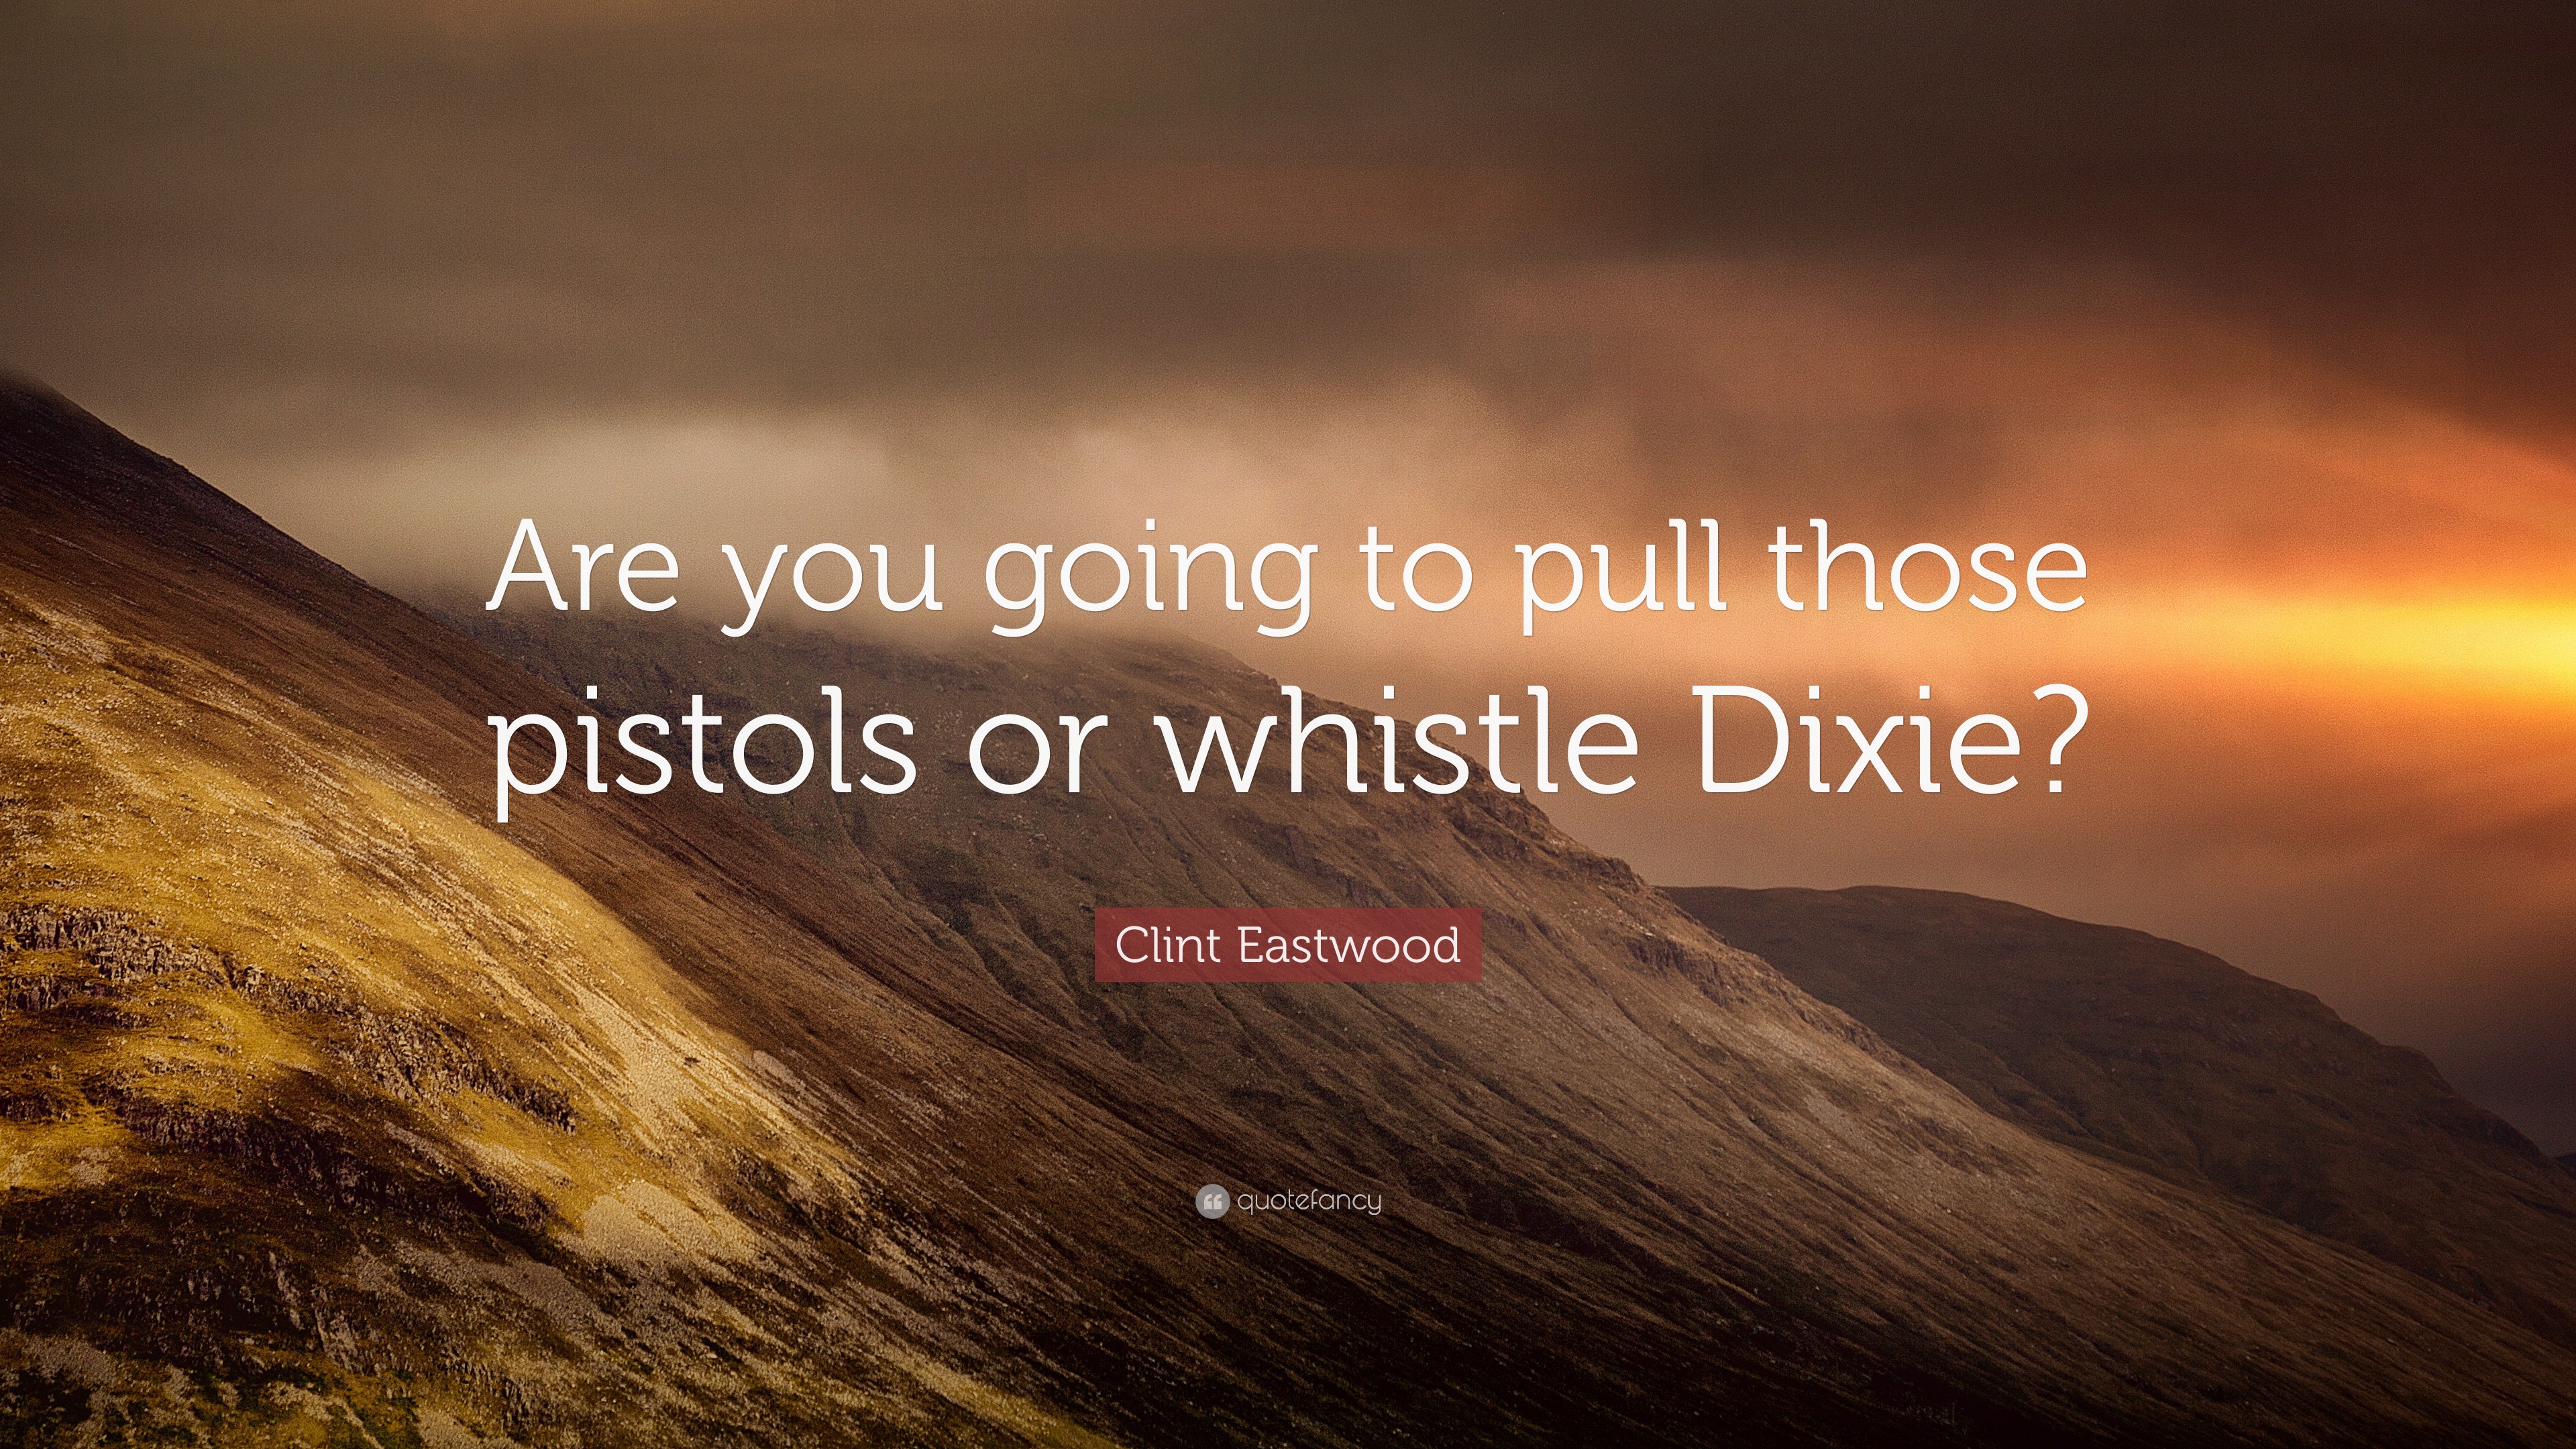 are you going to pull those pistols or whistle dixie